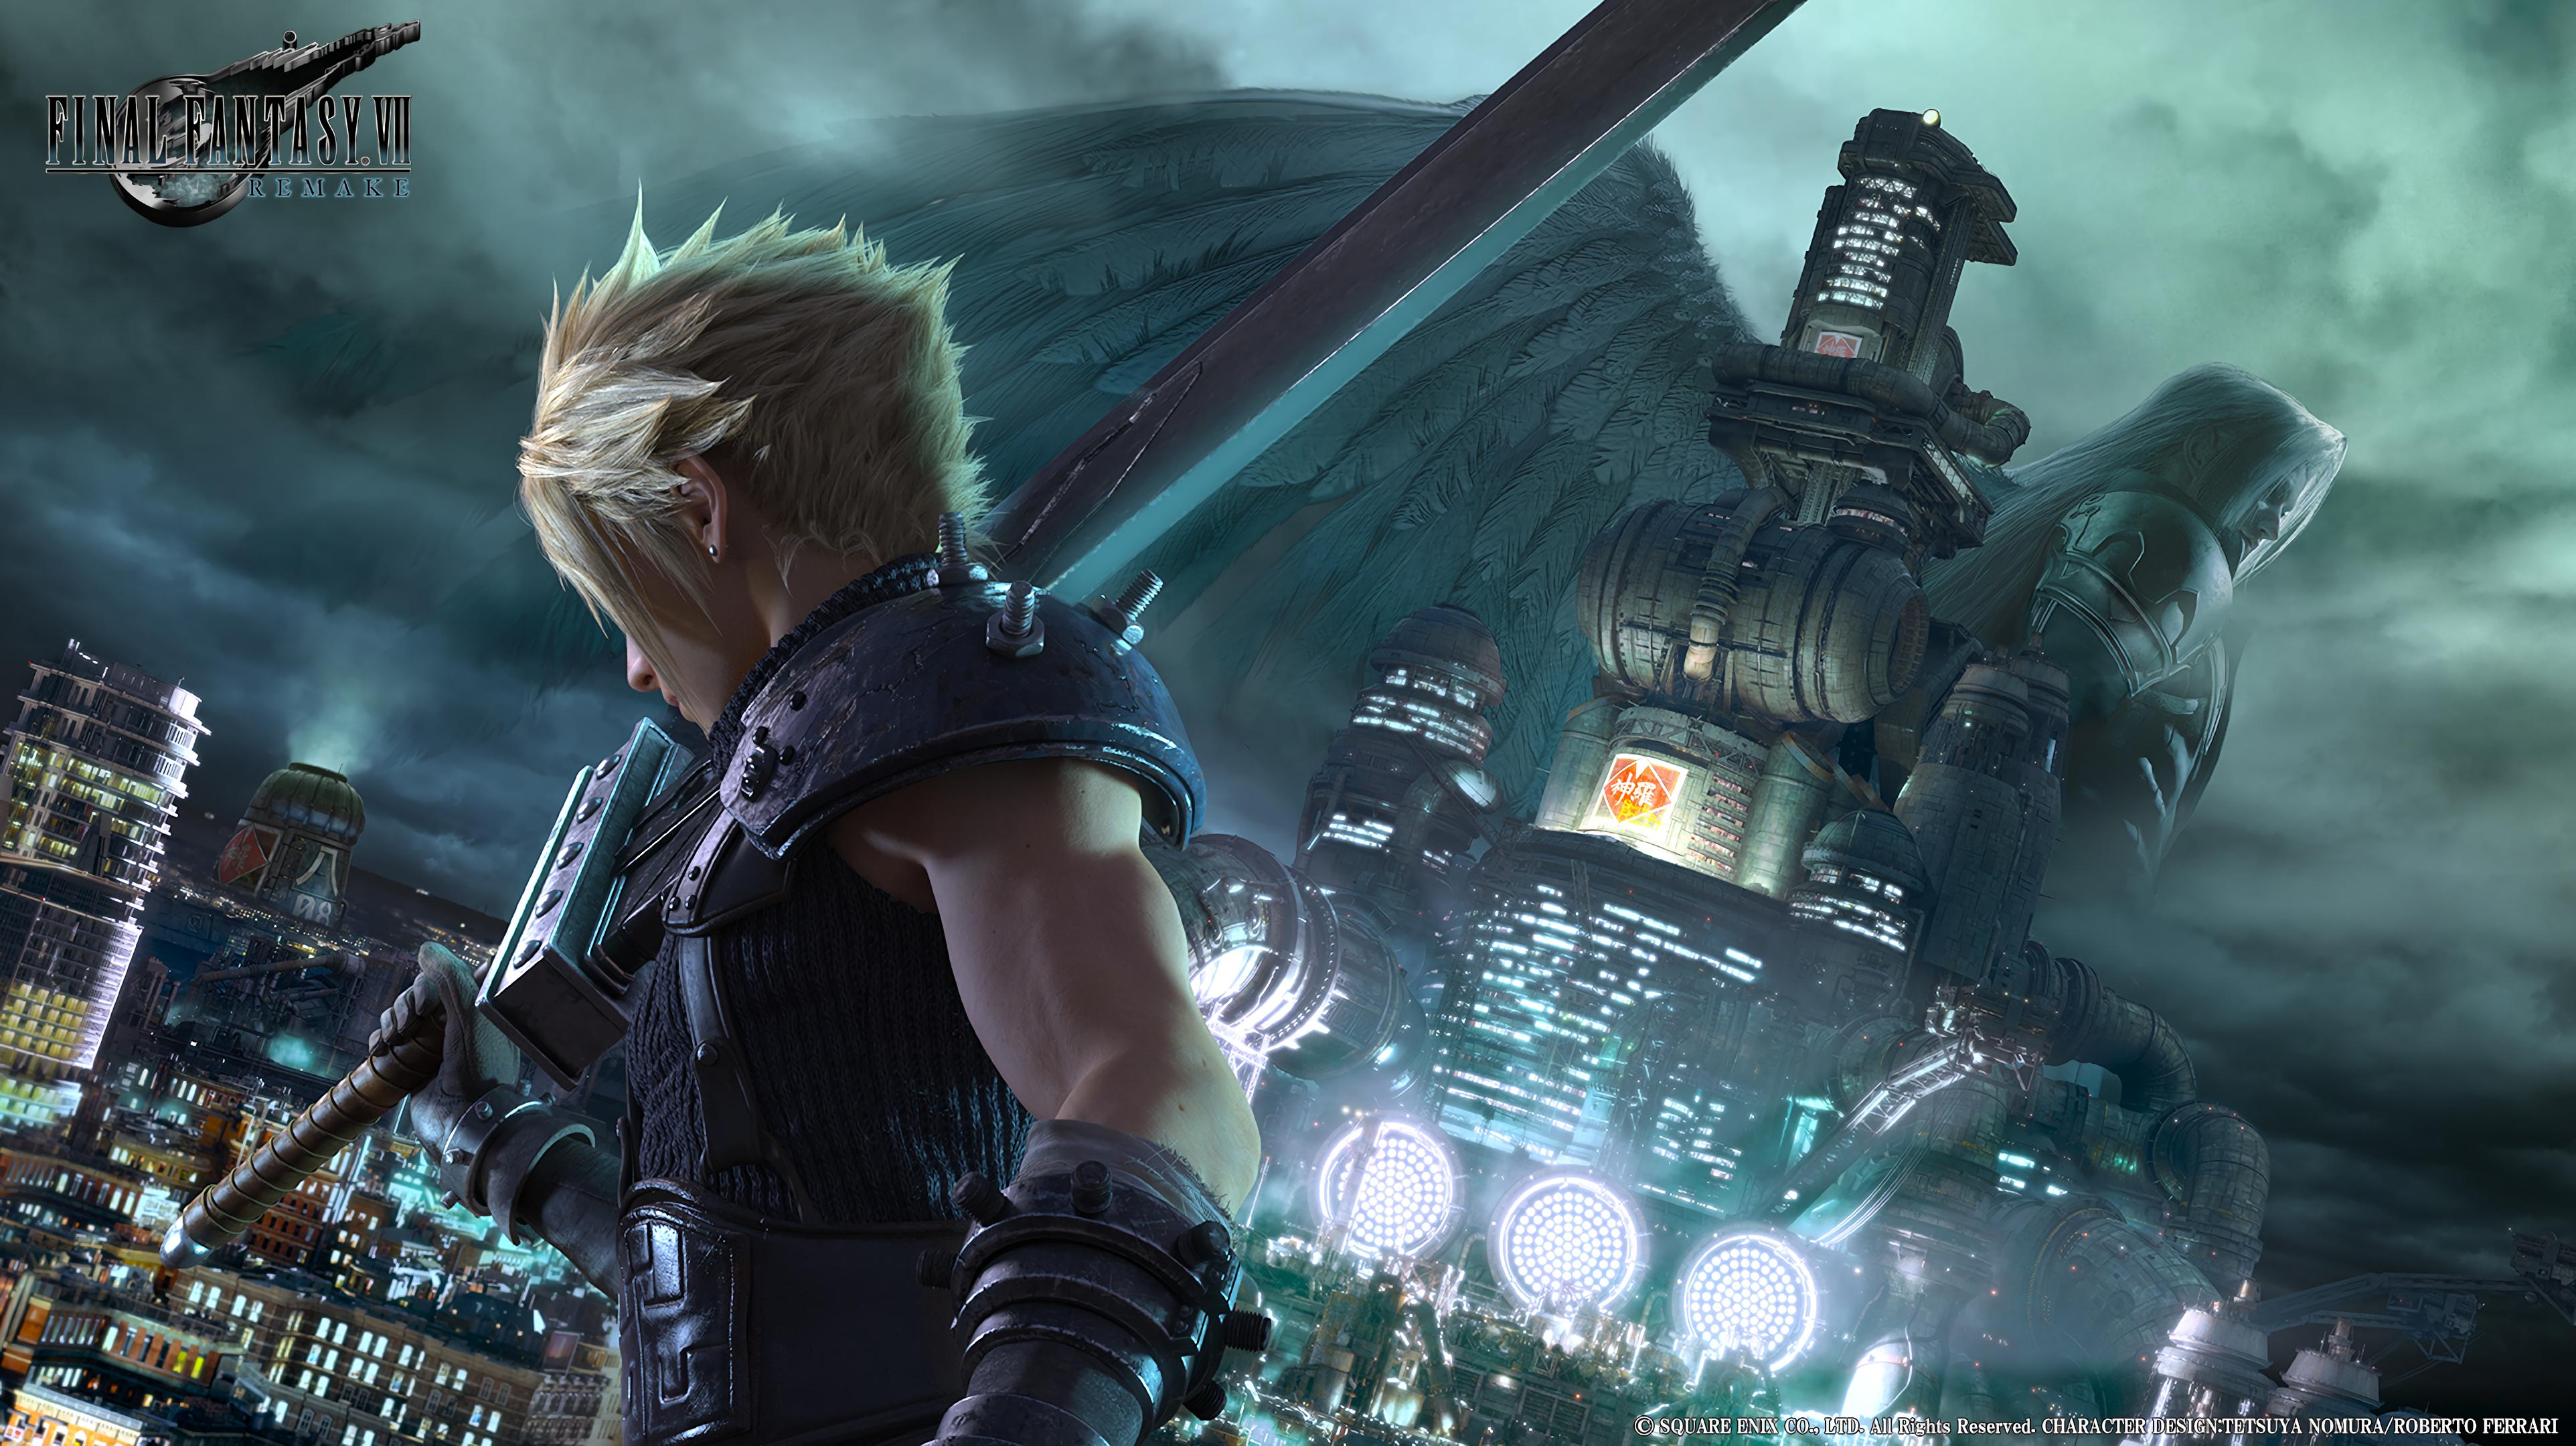 Don’t Trust Square Enix with Final Fantasy VII’s Remake